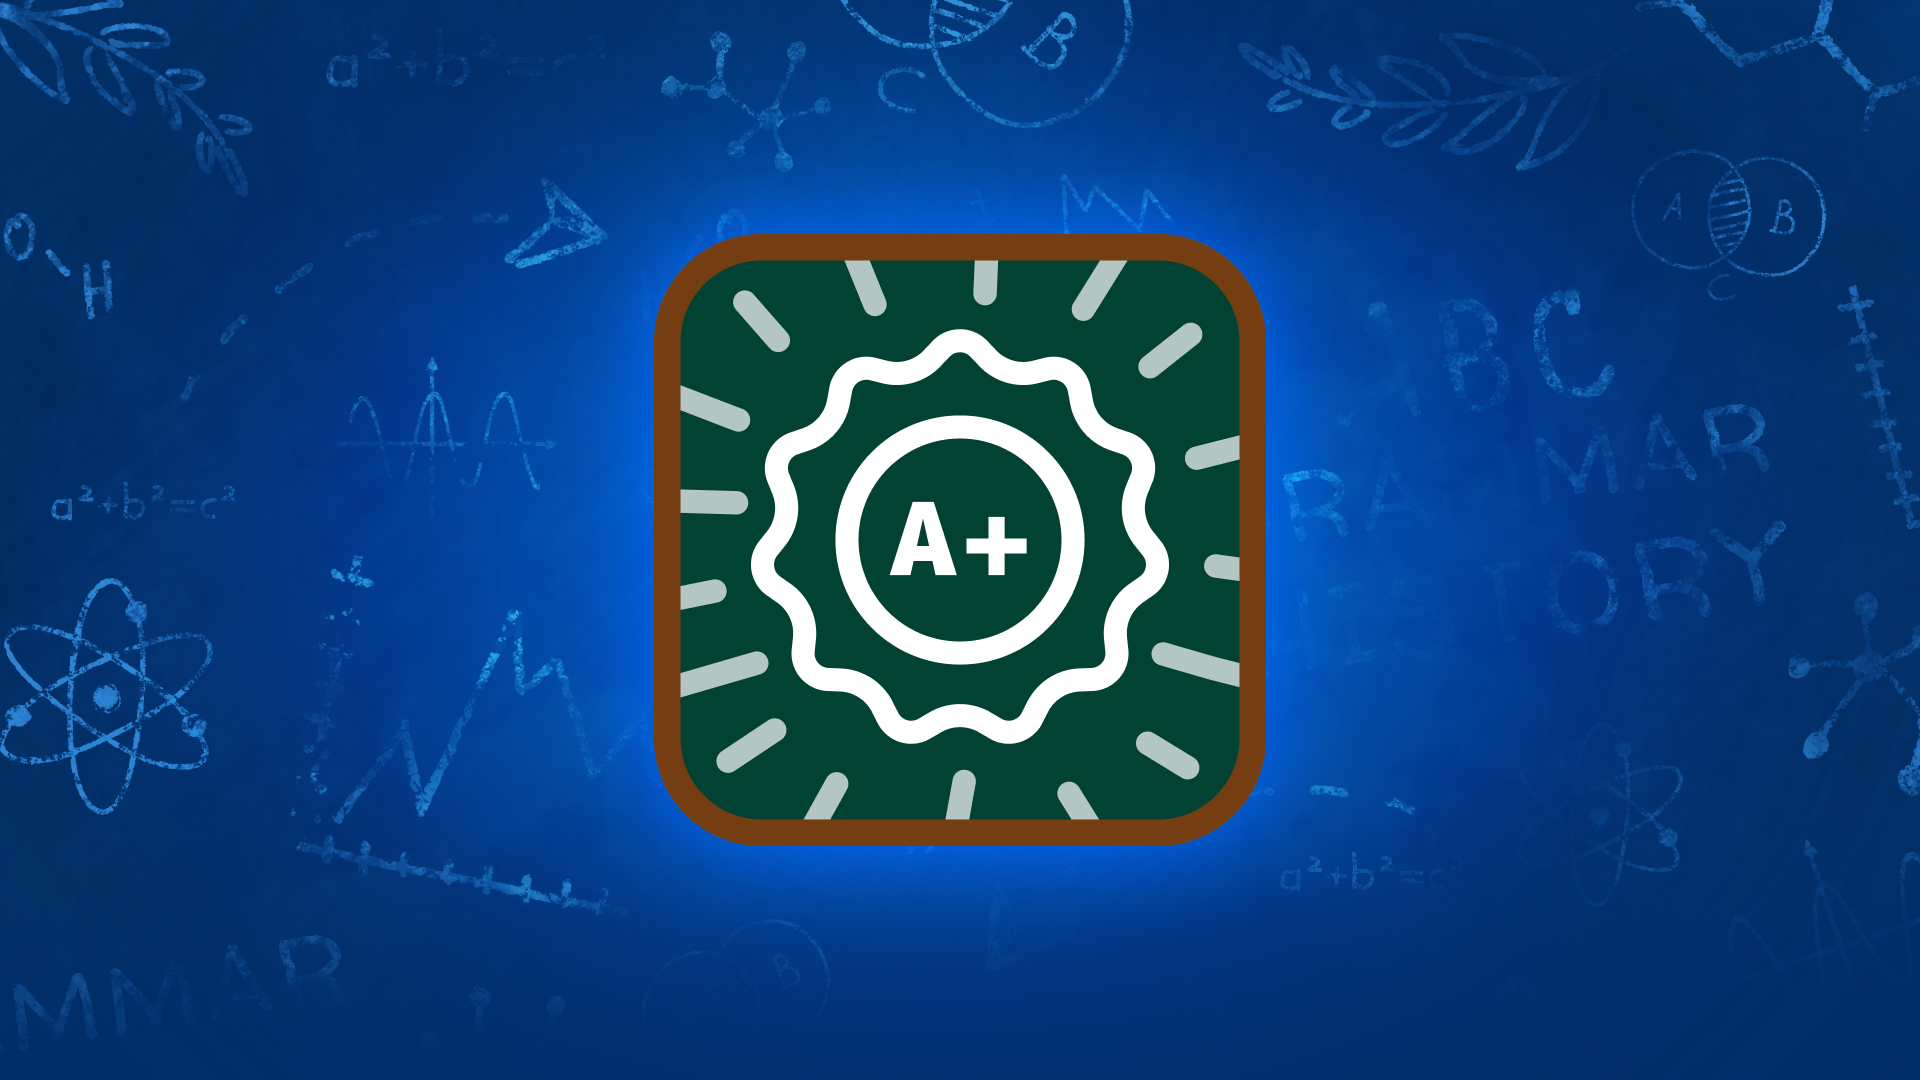 Icon for "A+" Student